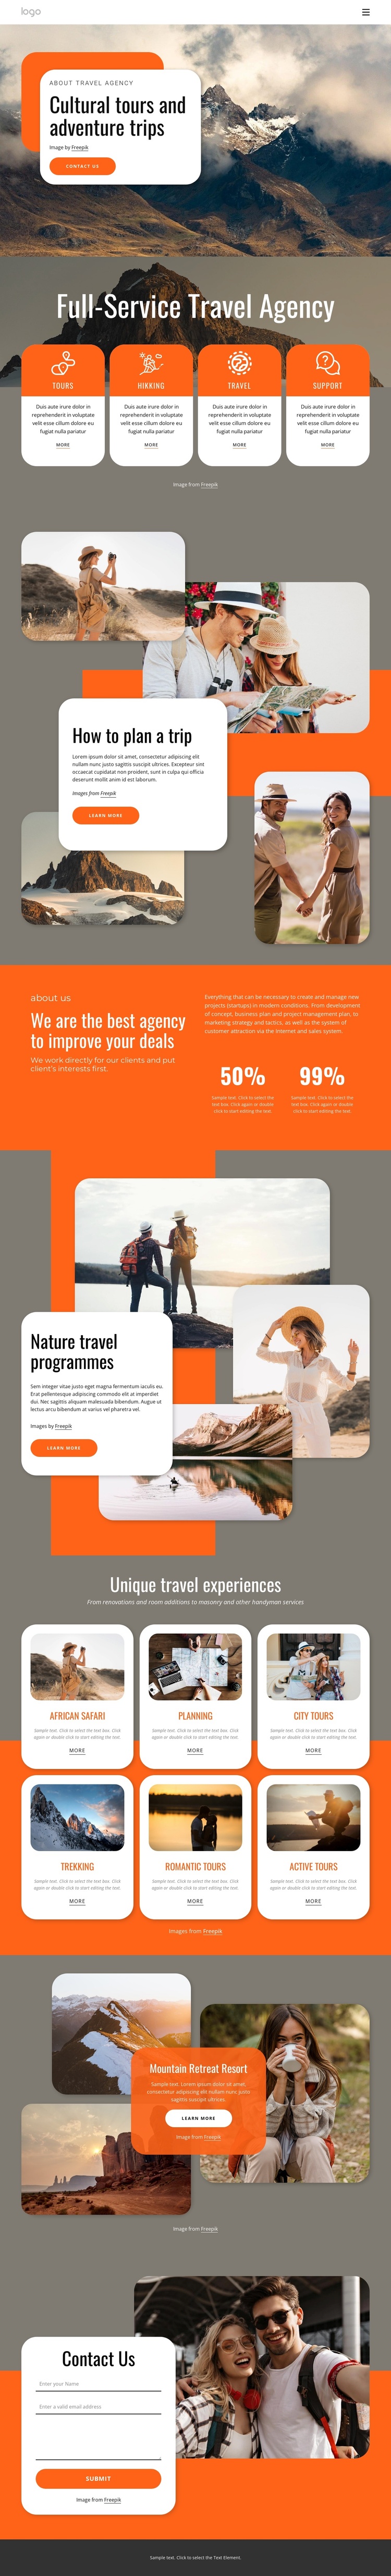 Group travel for all ages Joomla Template